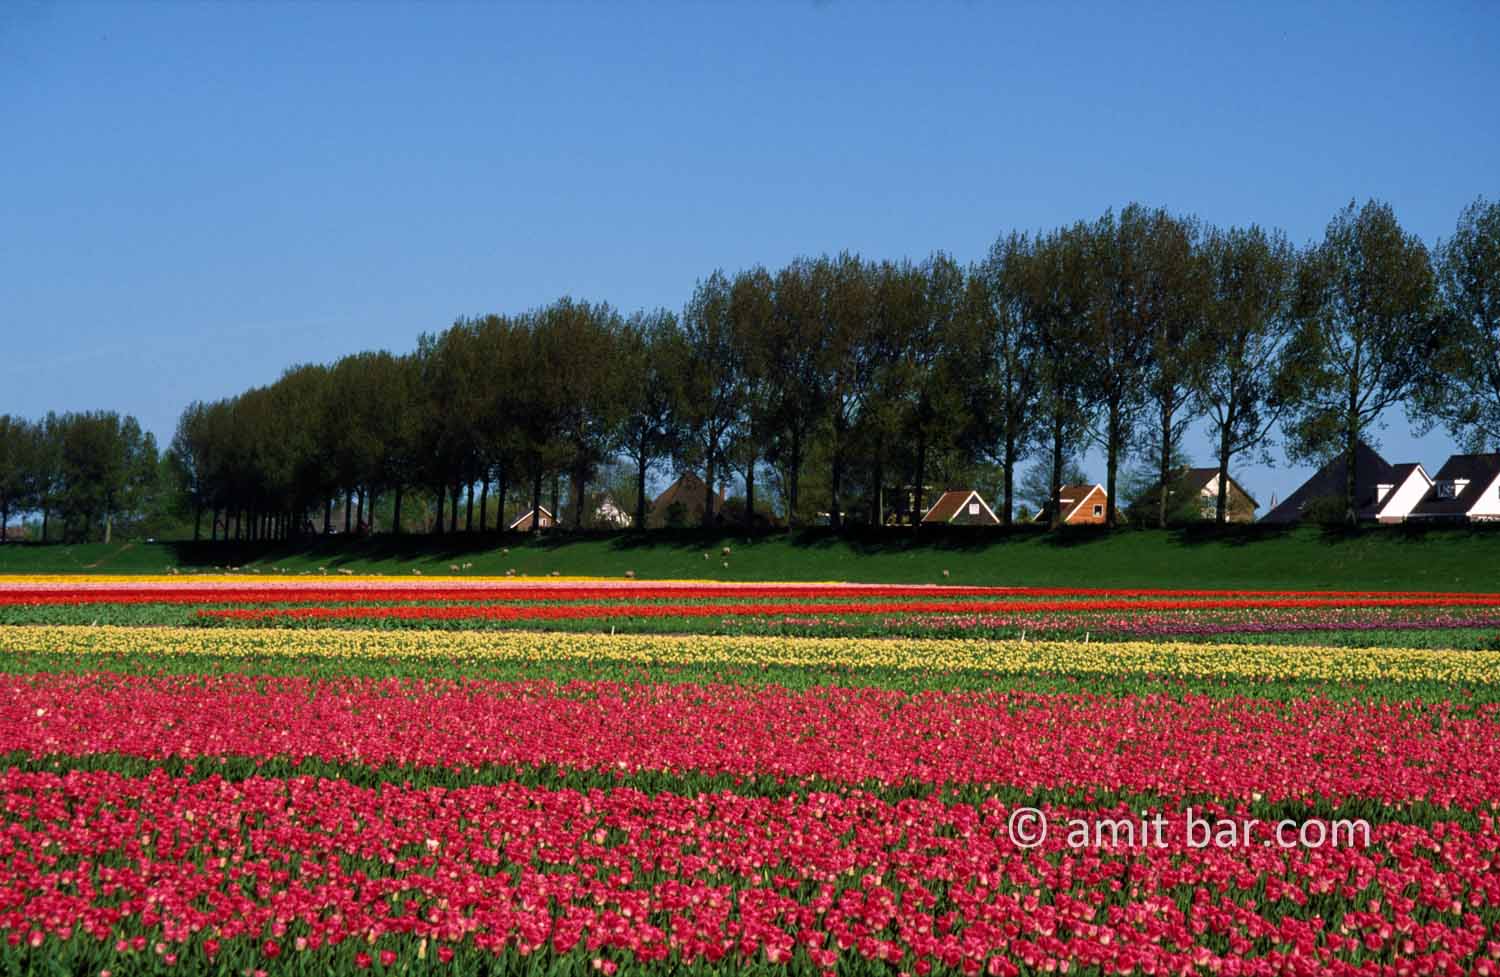 Colorful field: Colored tulips near Bergen, The Netheralnds